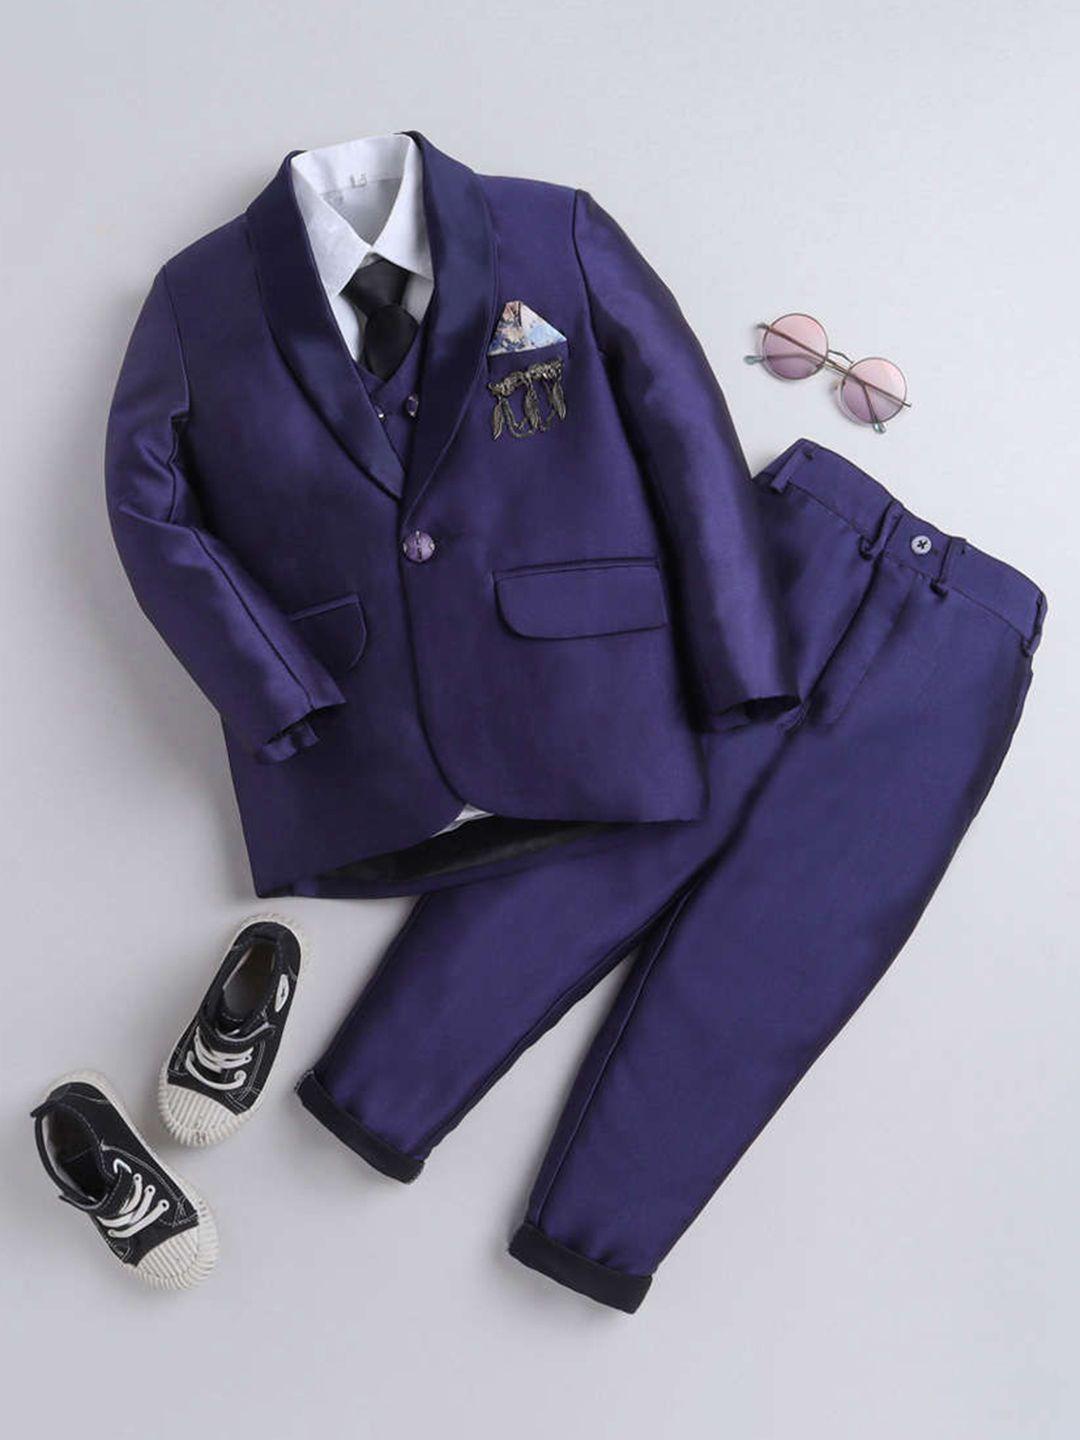 dkgf fashion boys purple single-breasted suit